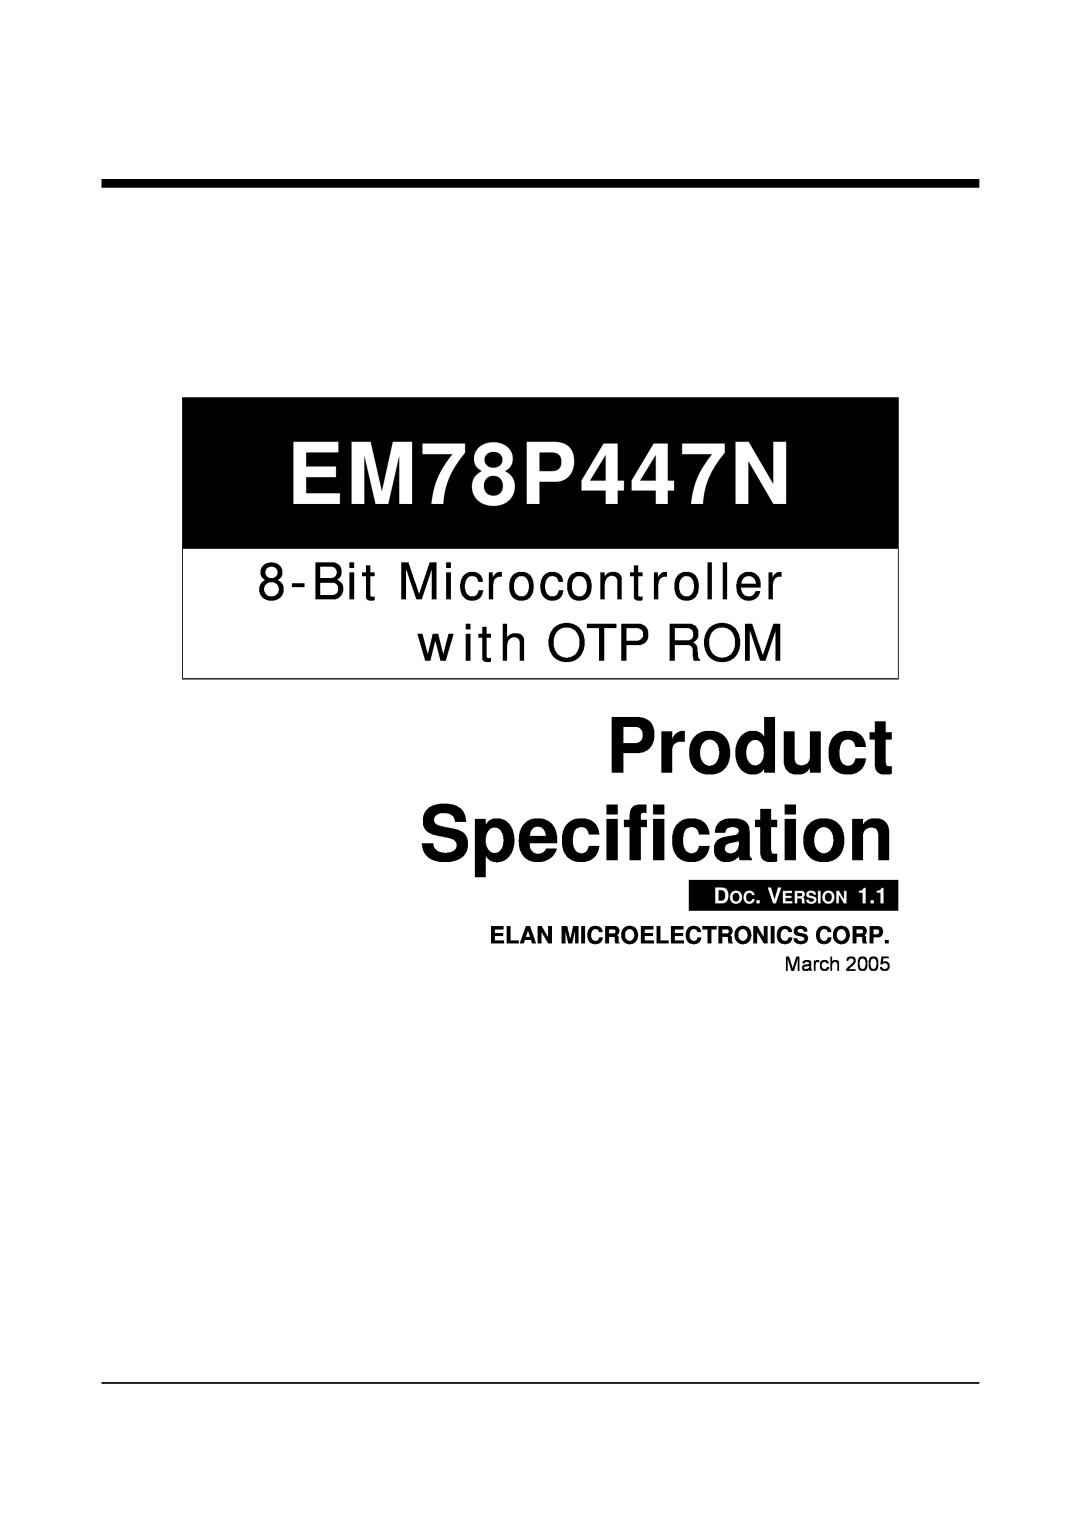 IBM EM78P447N manual Product Specification, Bit Microcontroller with OTP ROM, Elan Microelectronics Corp, March 